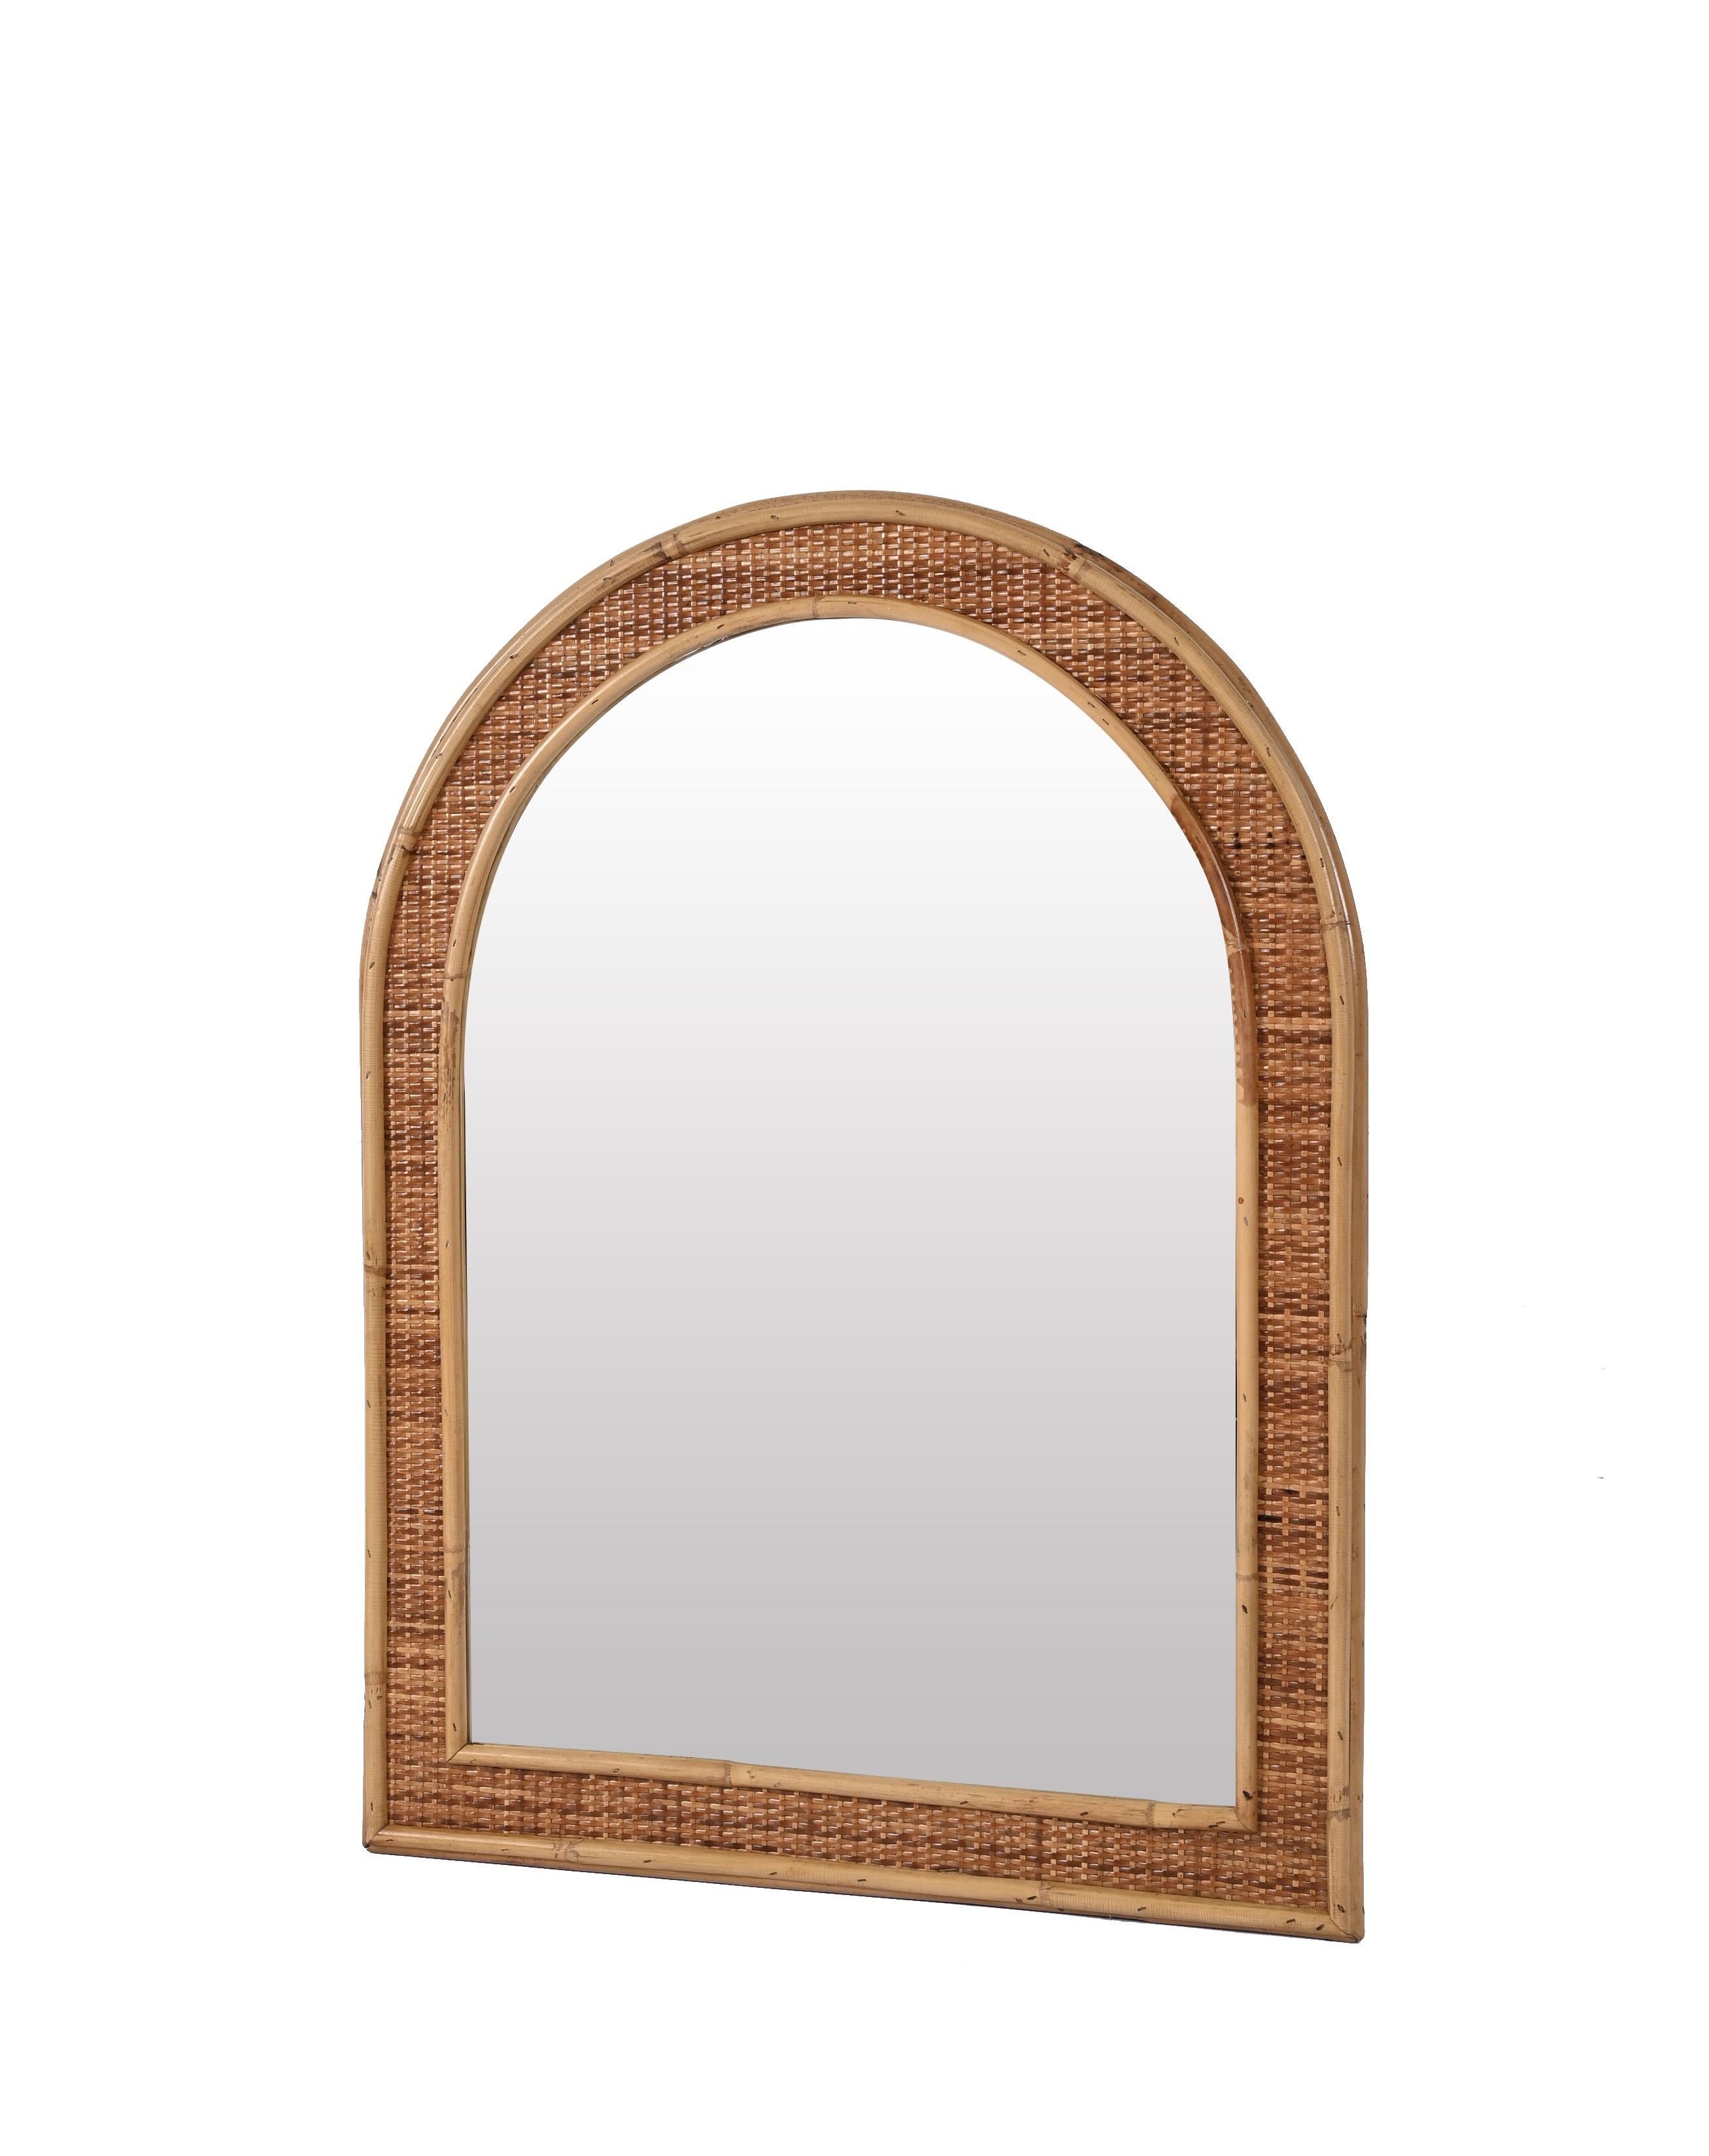 20th Century Mid-Century Bamboo and Woven Wicker Arch Mirror, Italy, 1970 For Sale